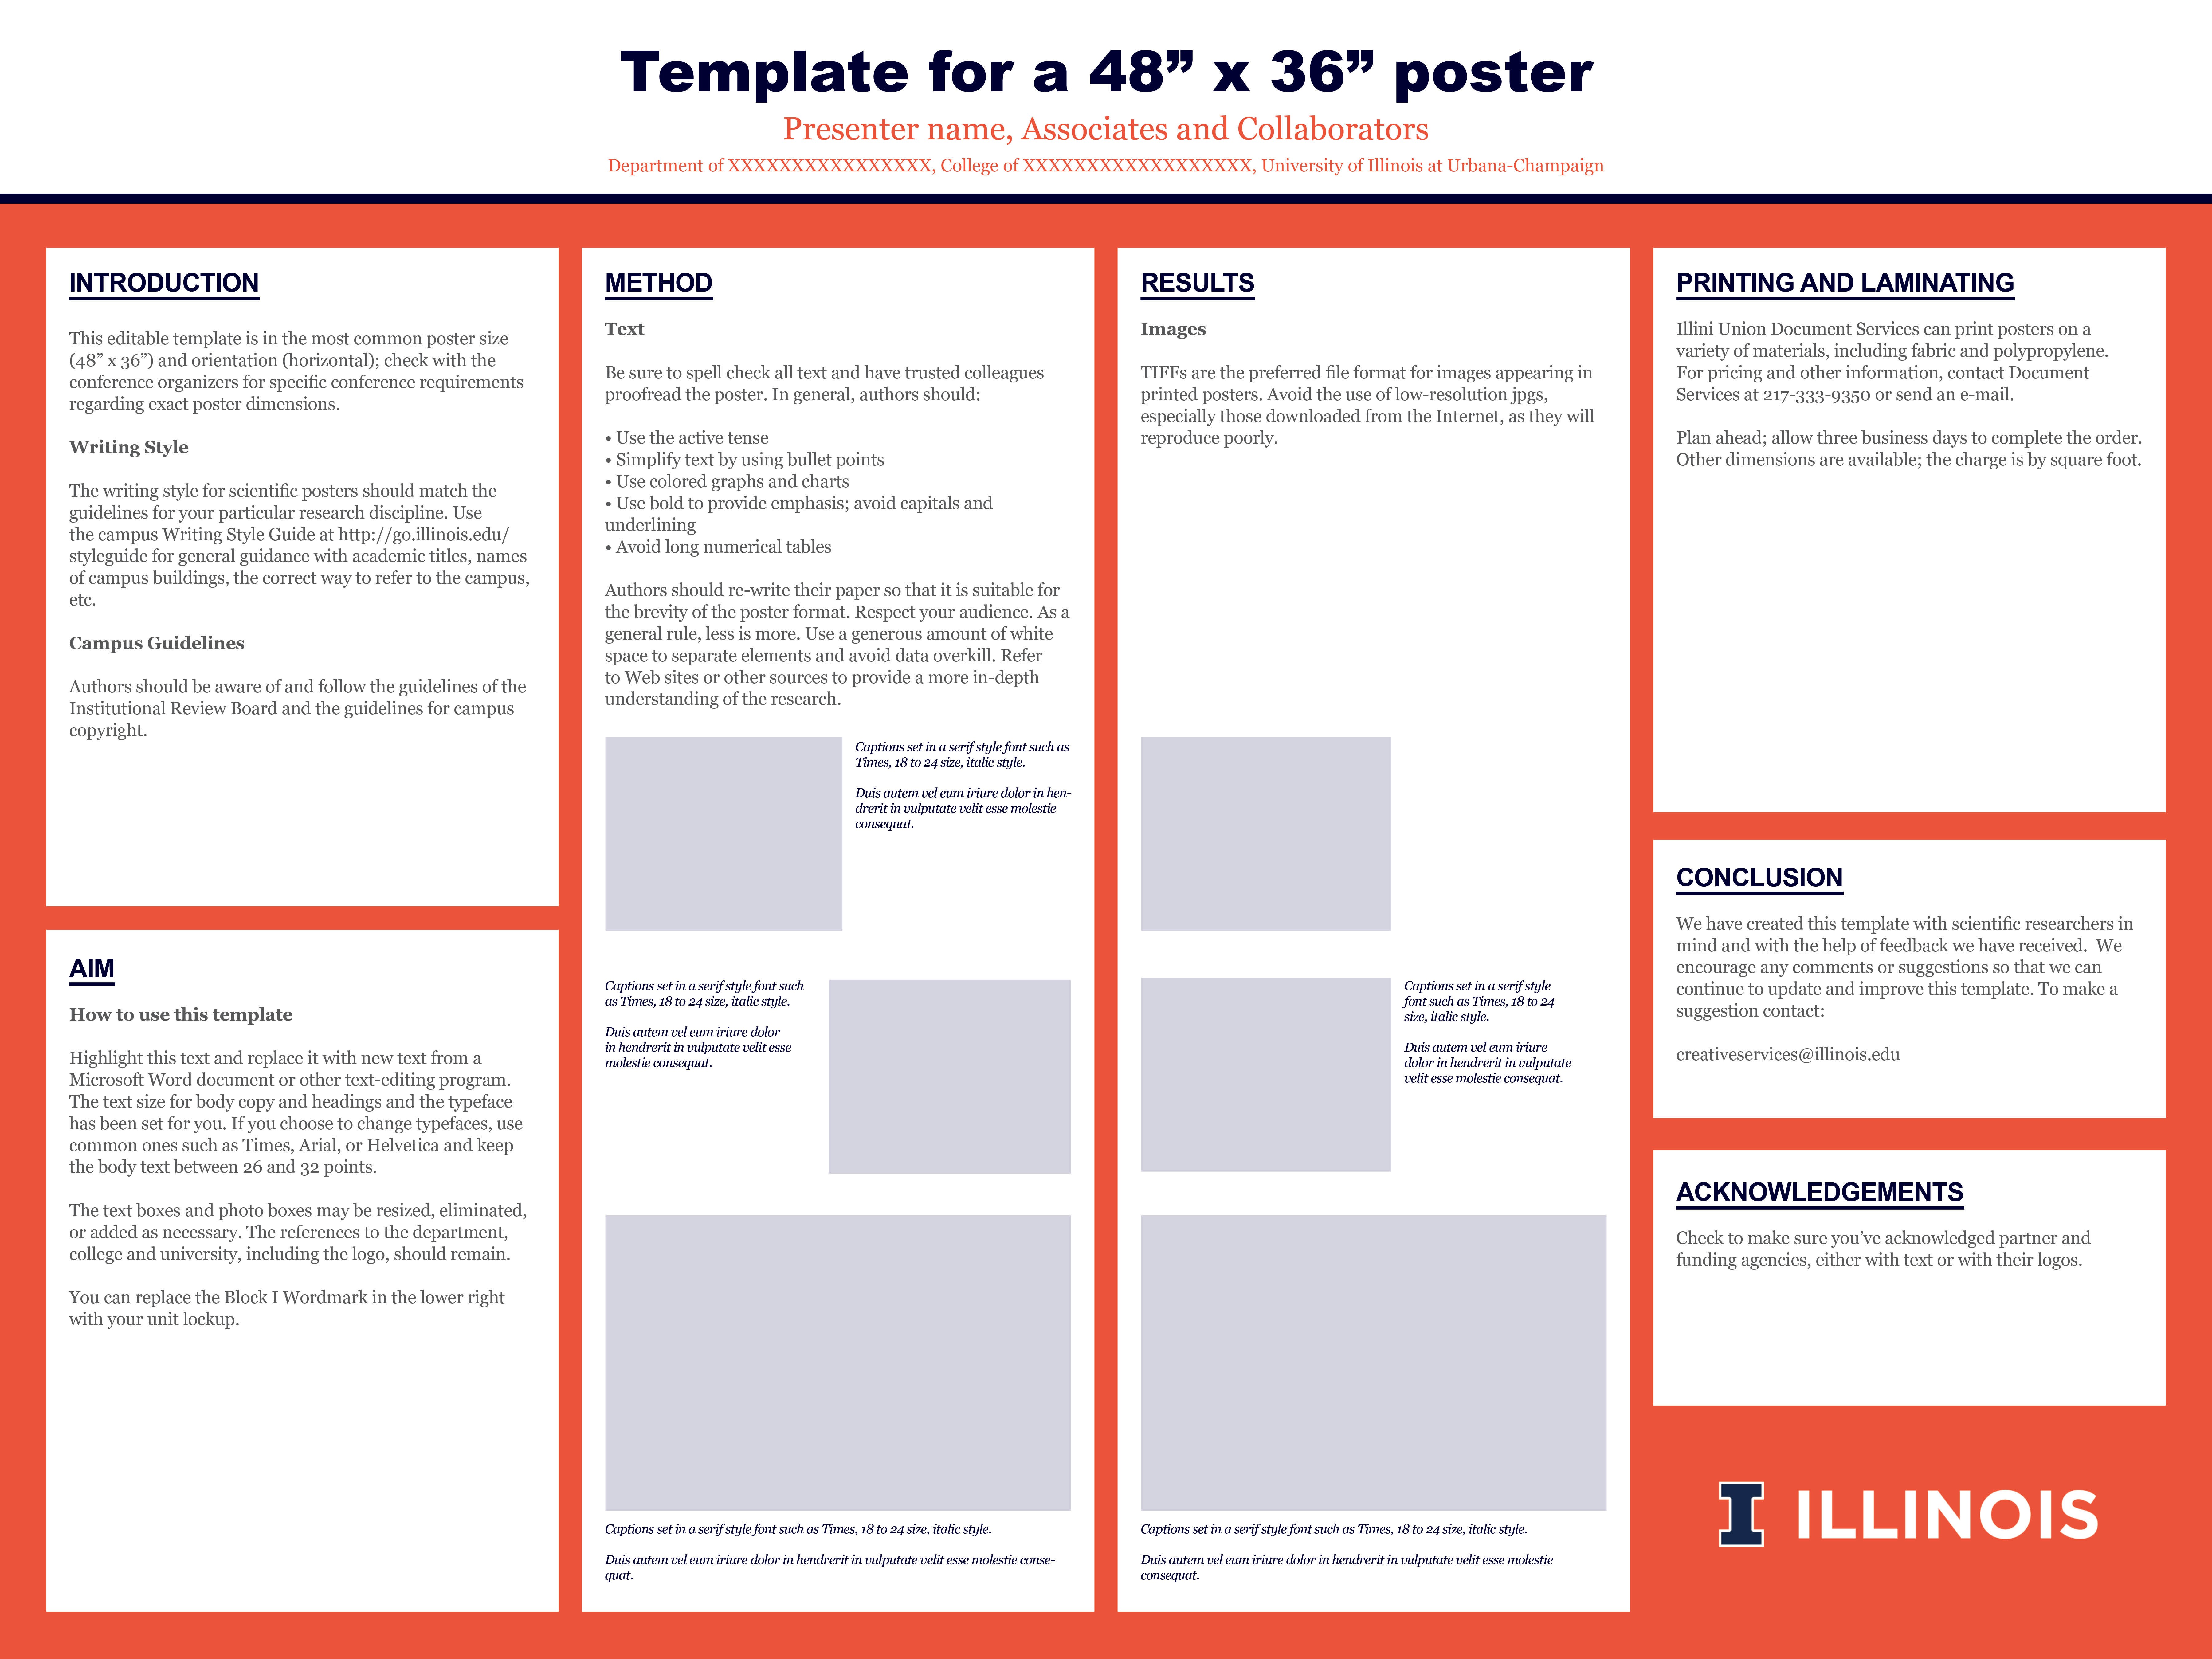 Research Poster Campus S Public Affairs Illinois Chemistry